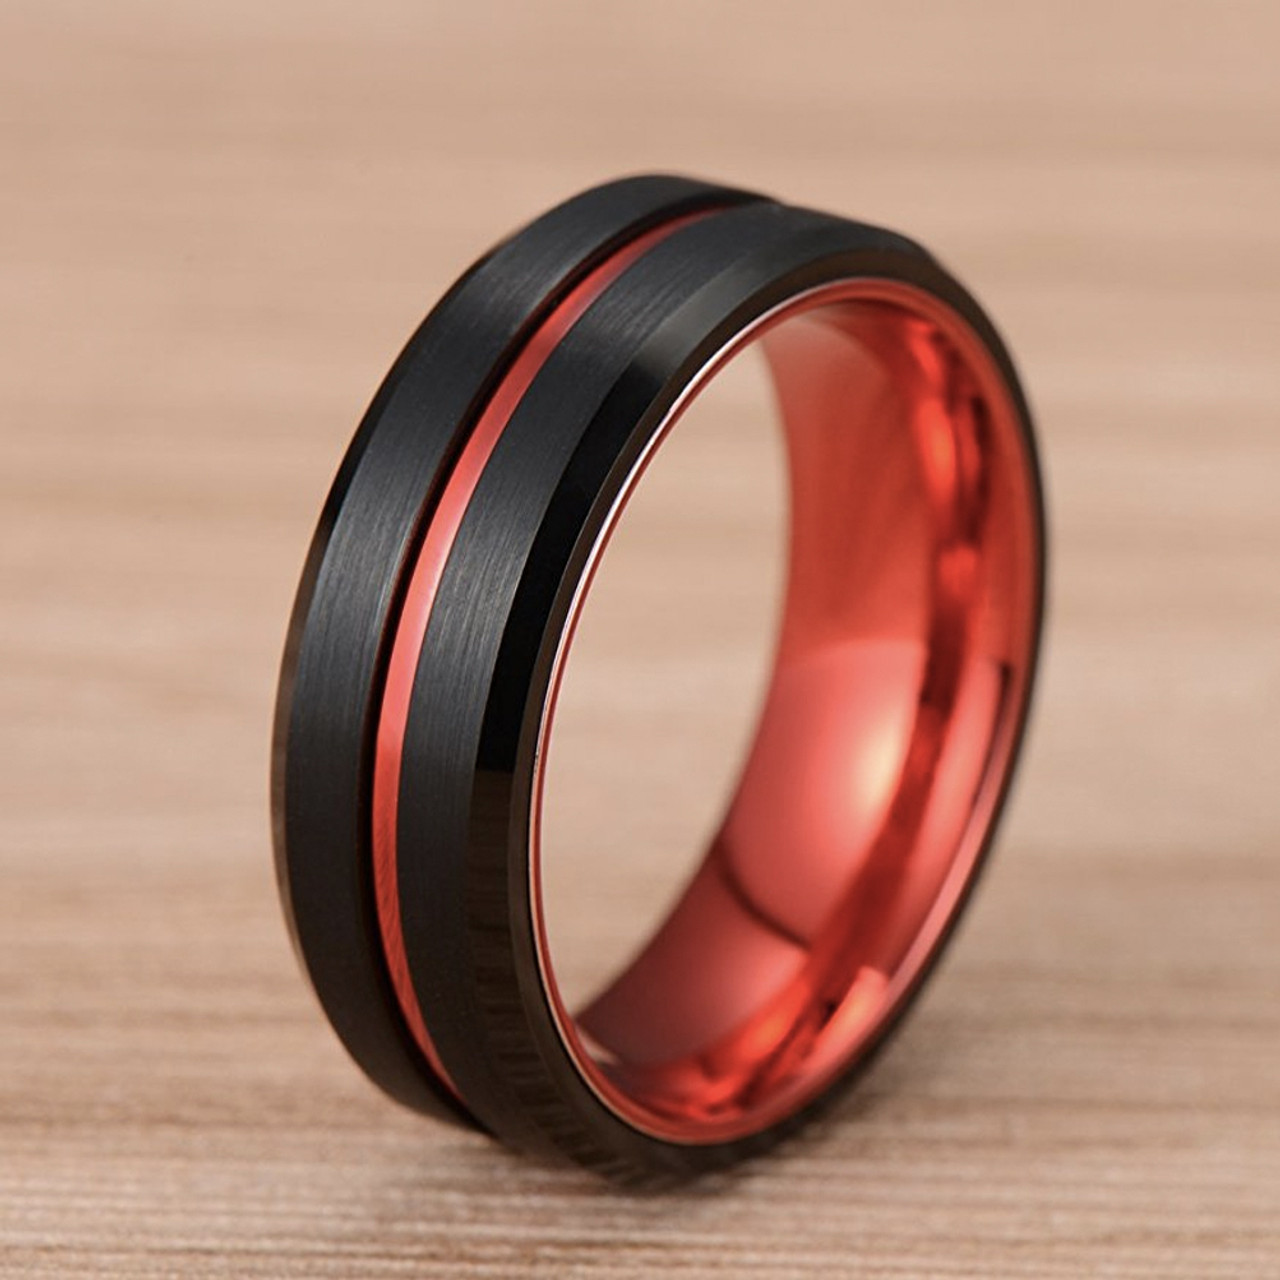 8mm - Unisex or Men's Tungsten Wedding Band. Black Matte Finish Tungsten Carbide Ring with Double Red Tone. Beveled Edge Wedding Band